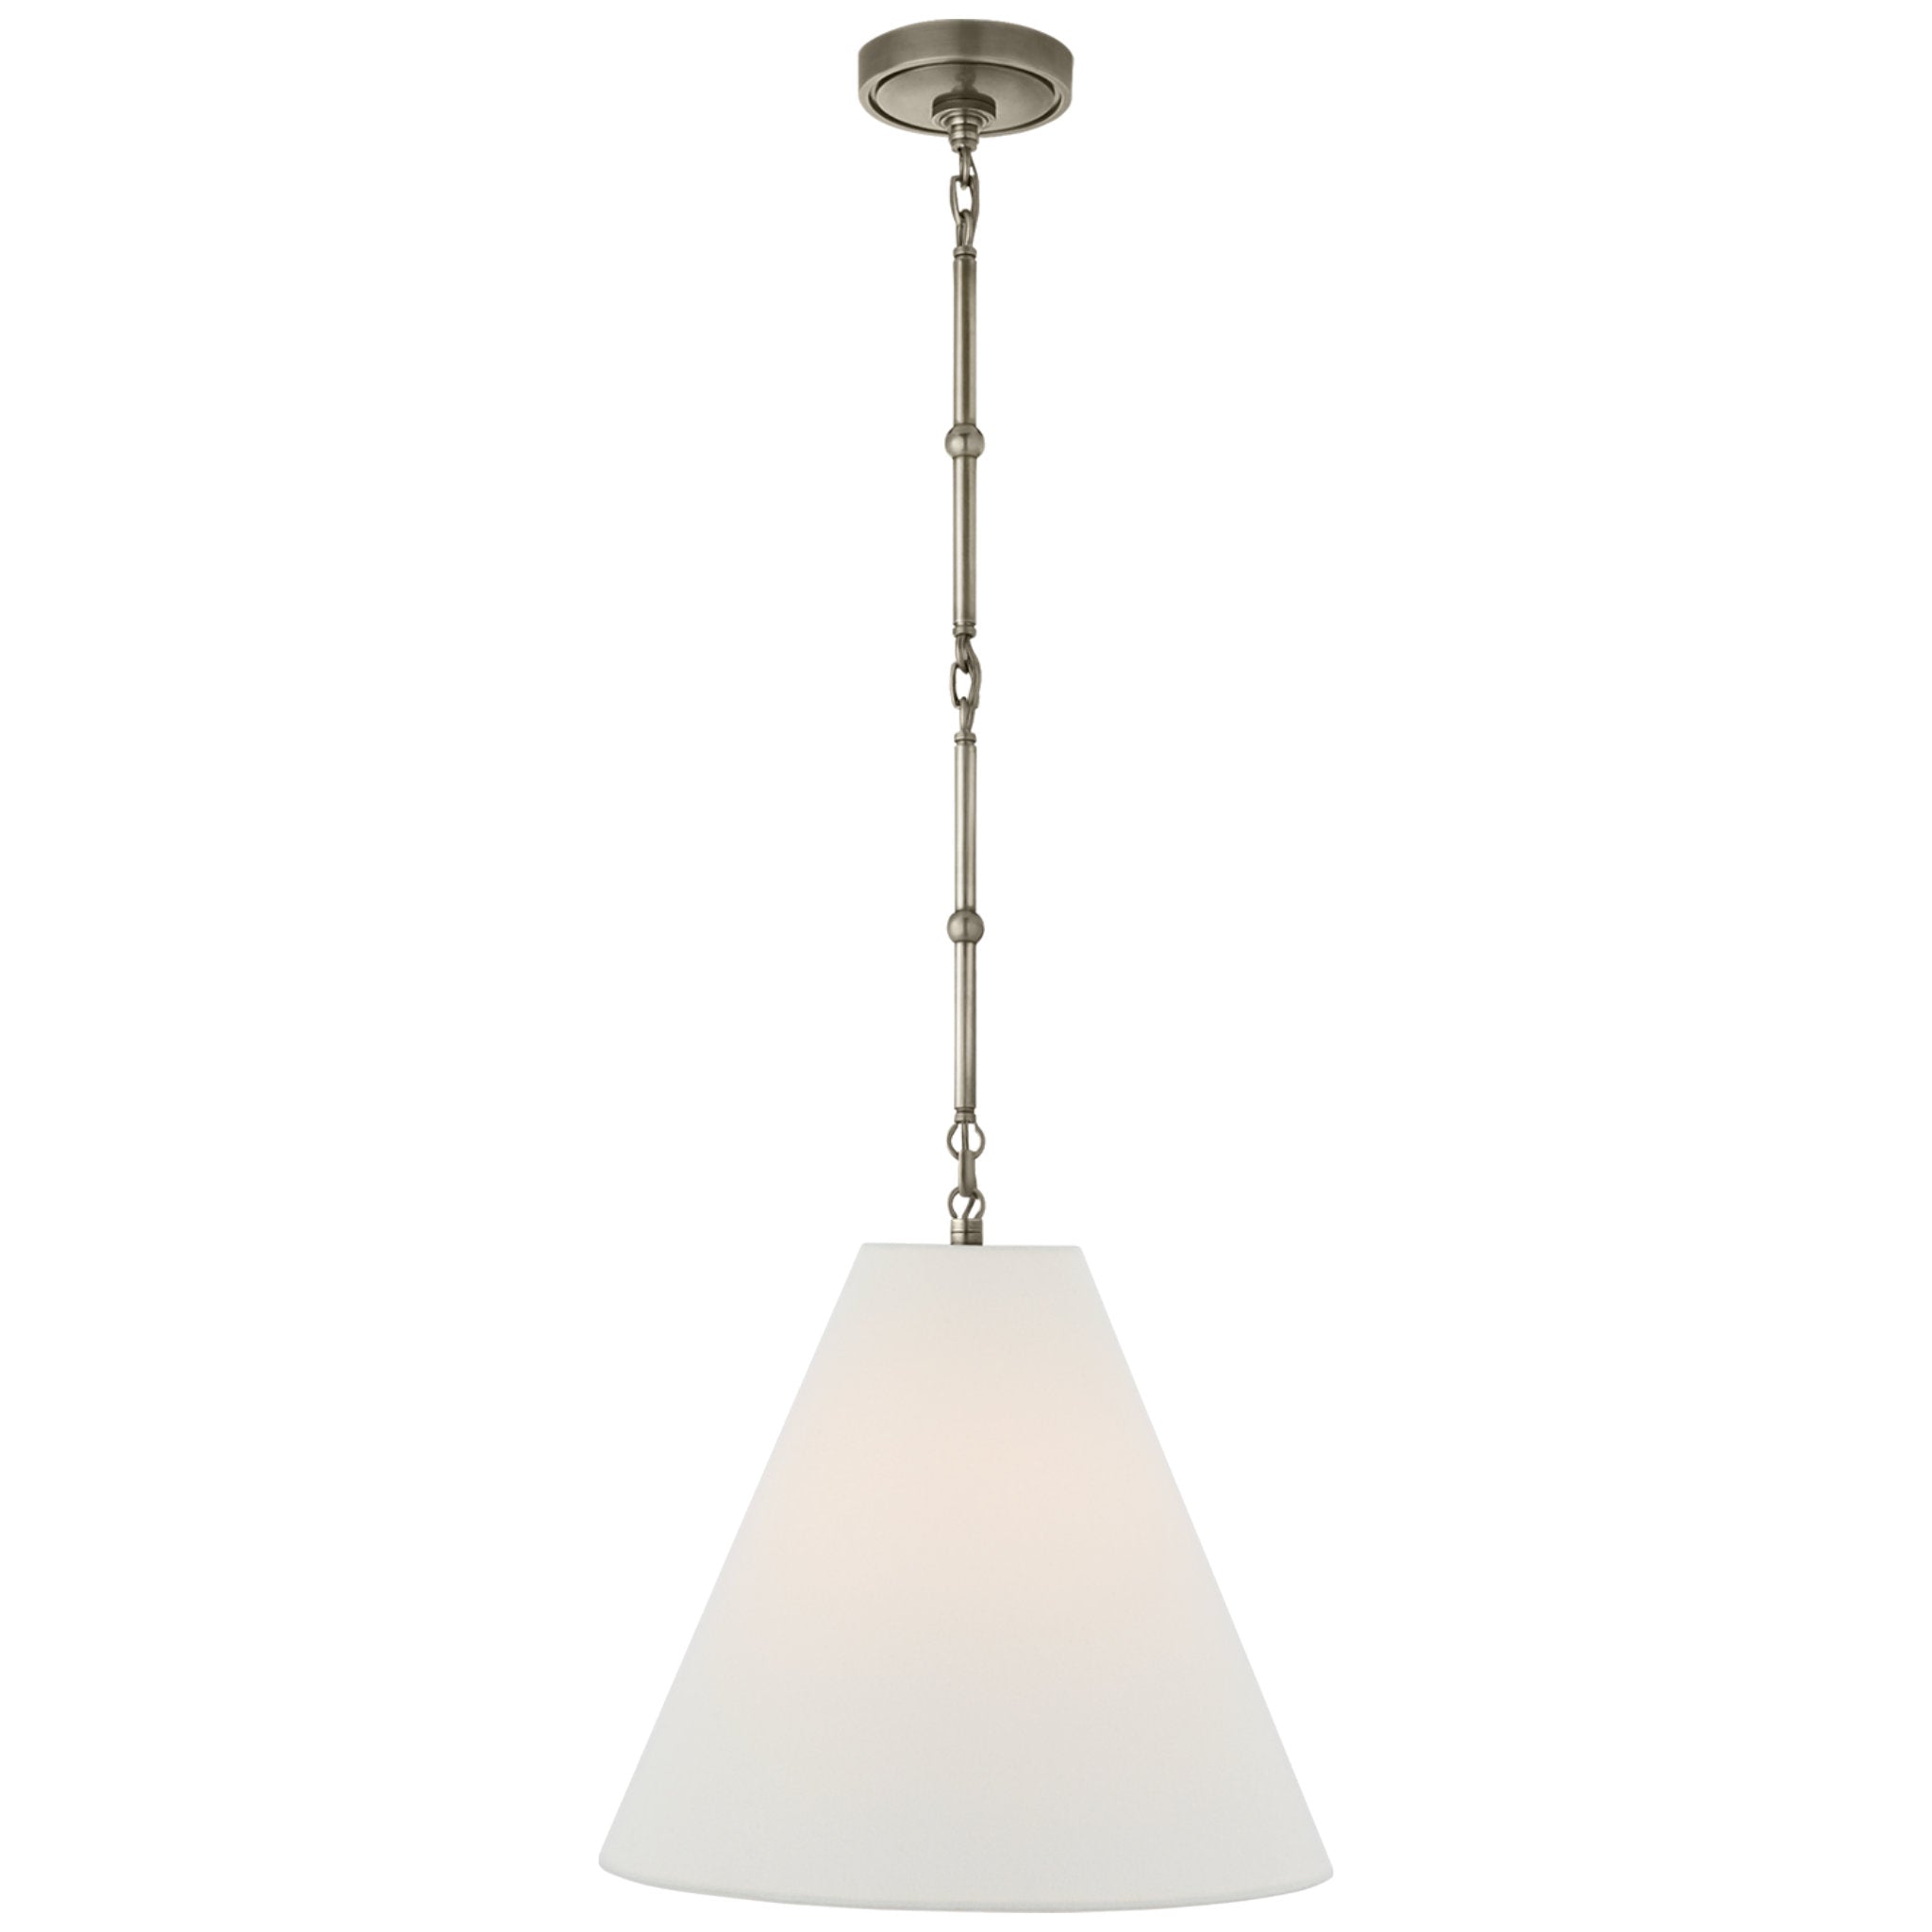 TOB5014HABAW by Visual Comfort - Goodman Large Hanging Lamp in Hand-Rubbed  Antique Brass with Antique White Shade